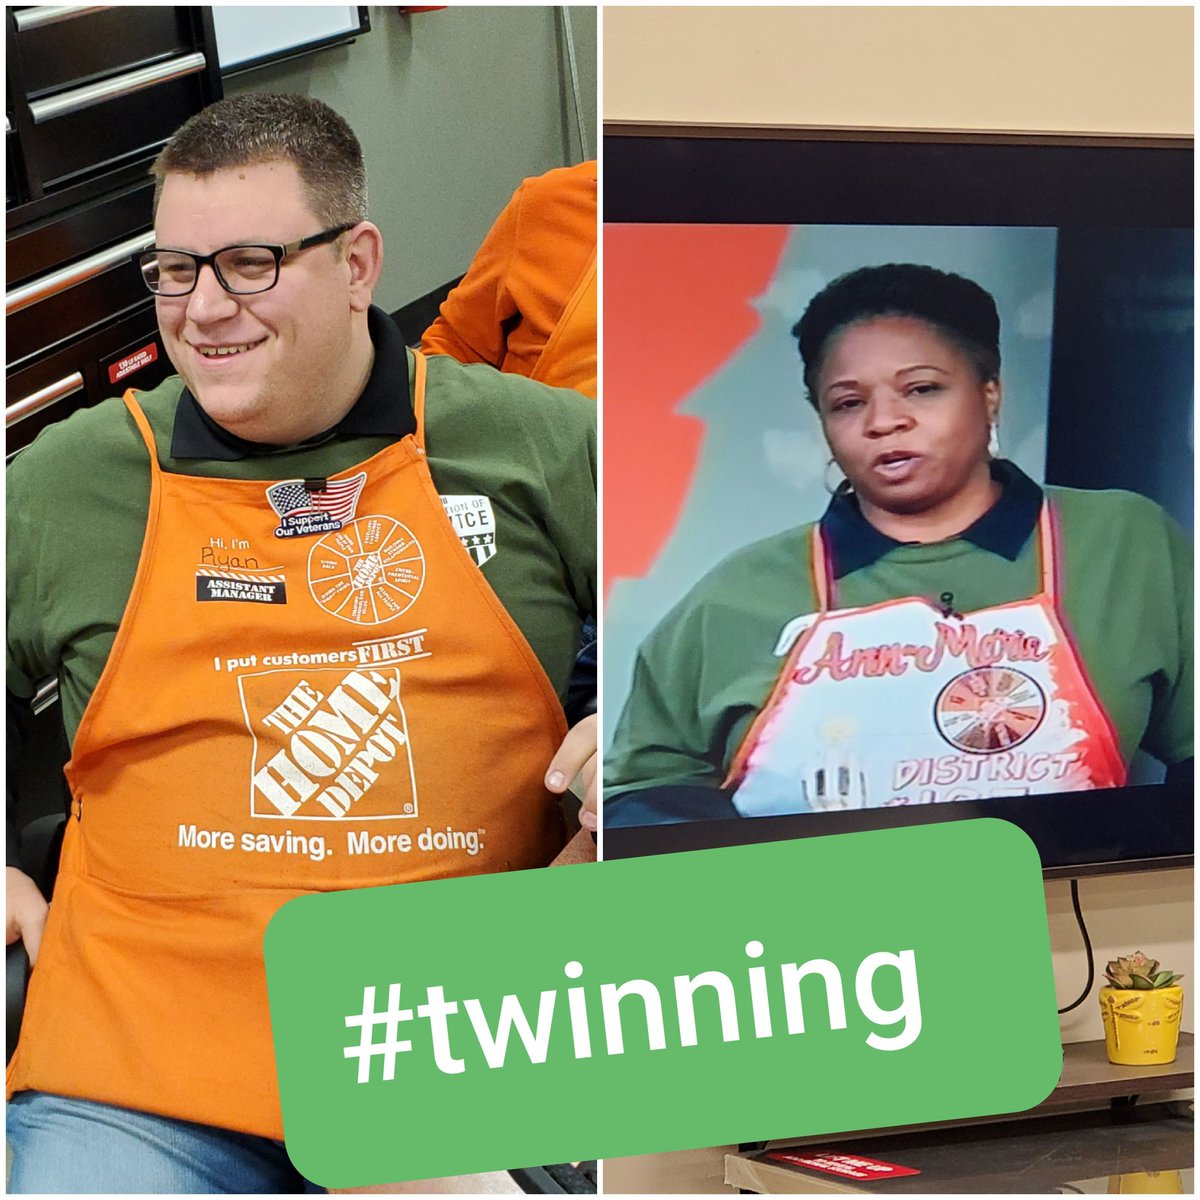 In STAFF this monday I saw some #twinning going on! #whoworeitbetter #greatmindsthinksalike #sillyASMryan #veteransday2019 @THDanthony @KCKoeppen @lrynsmock